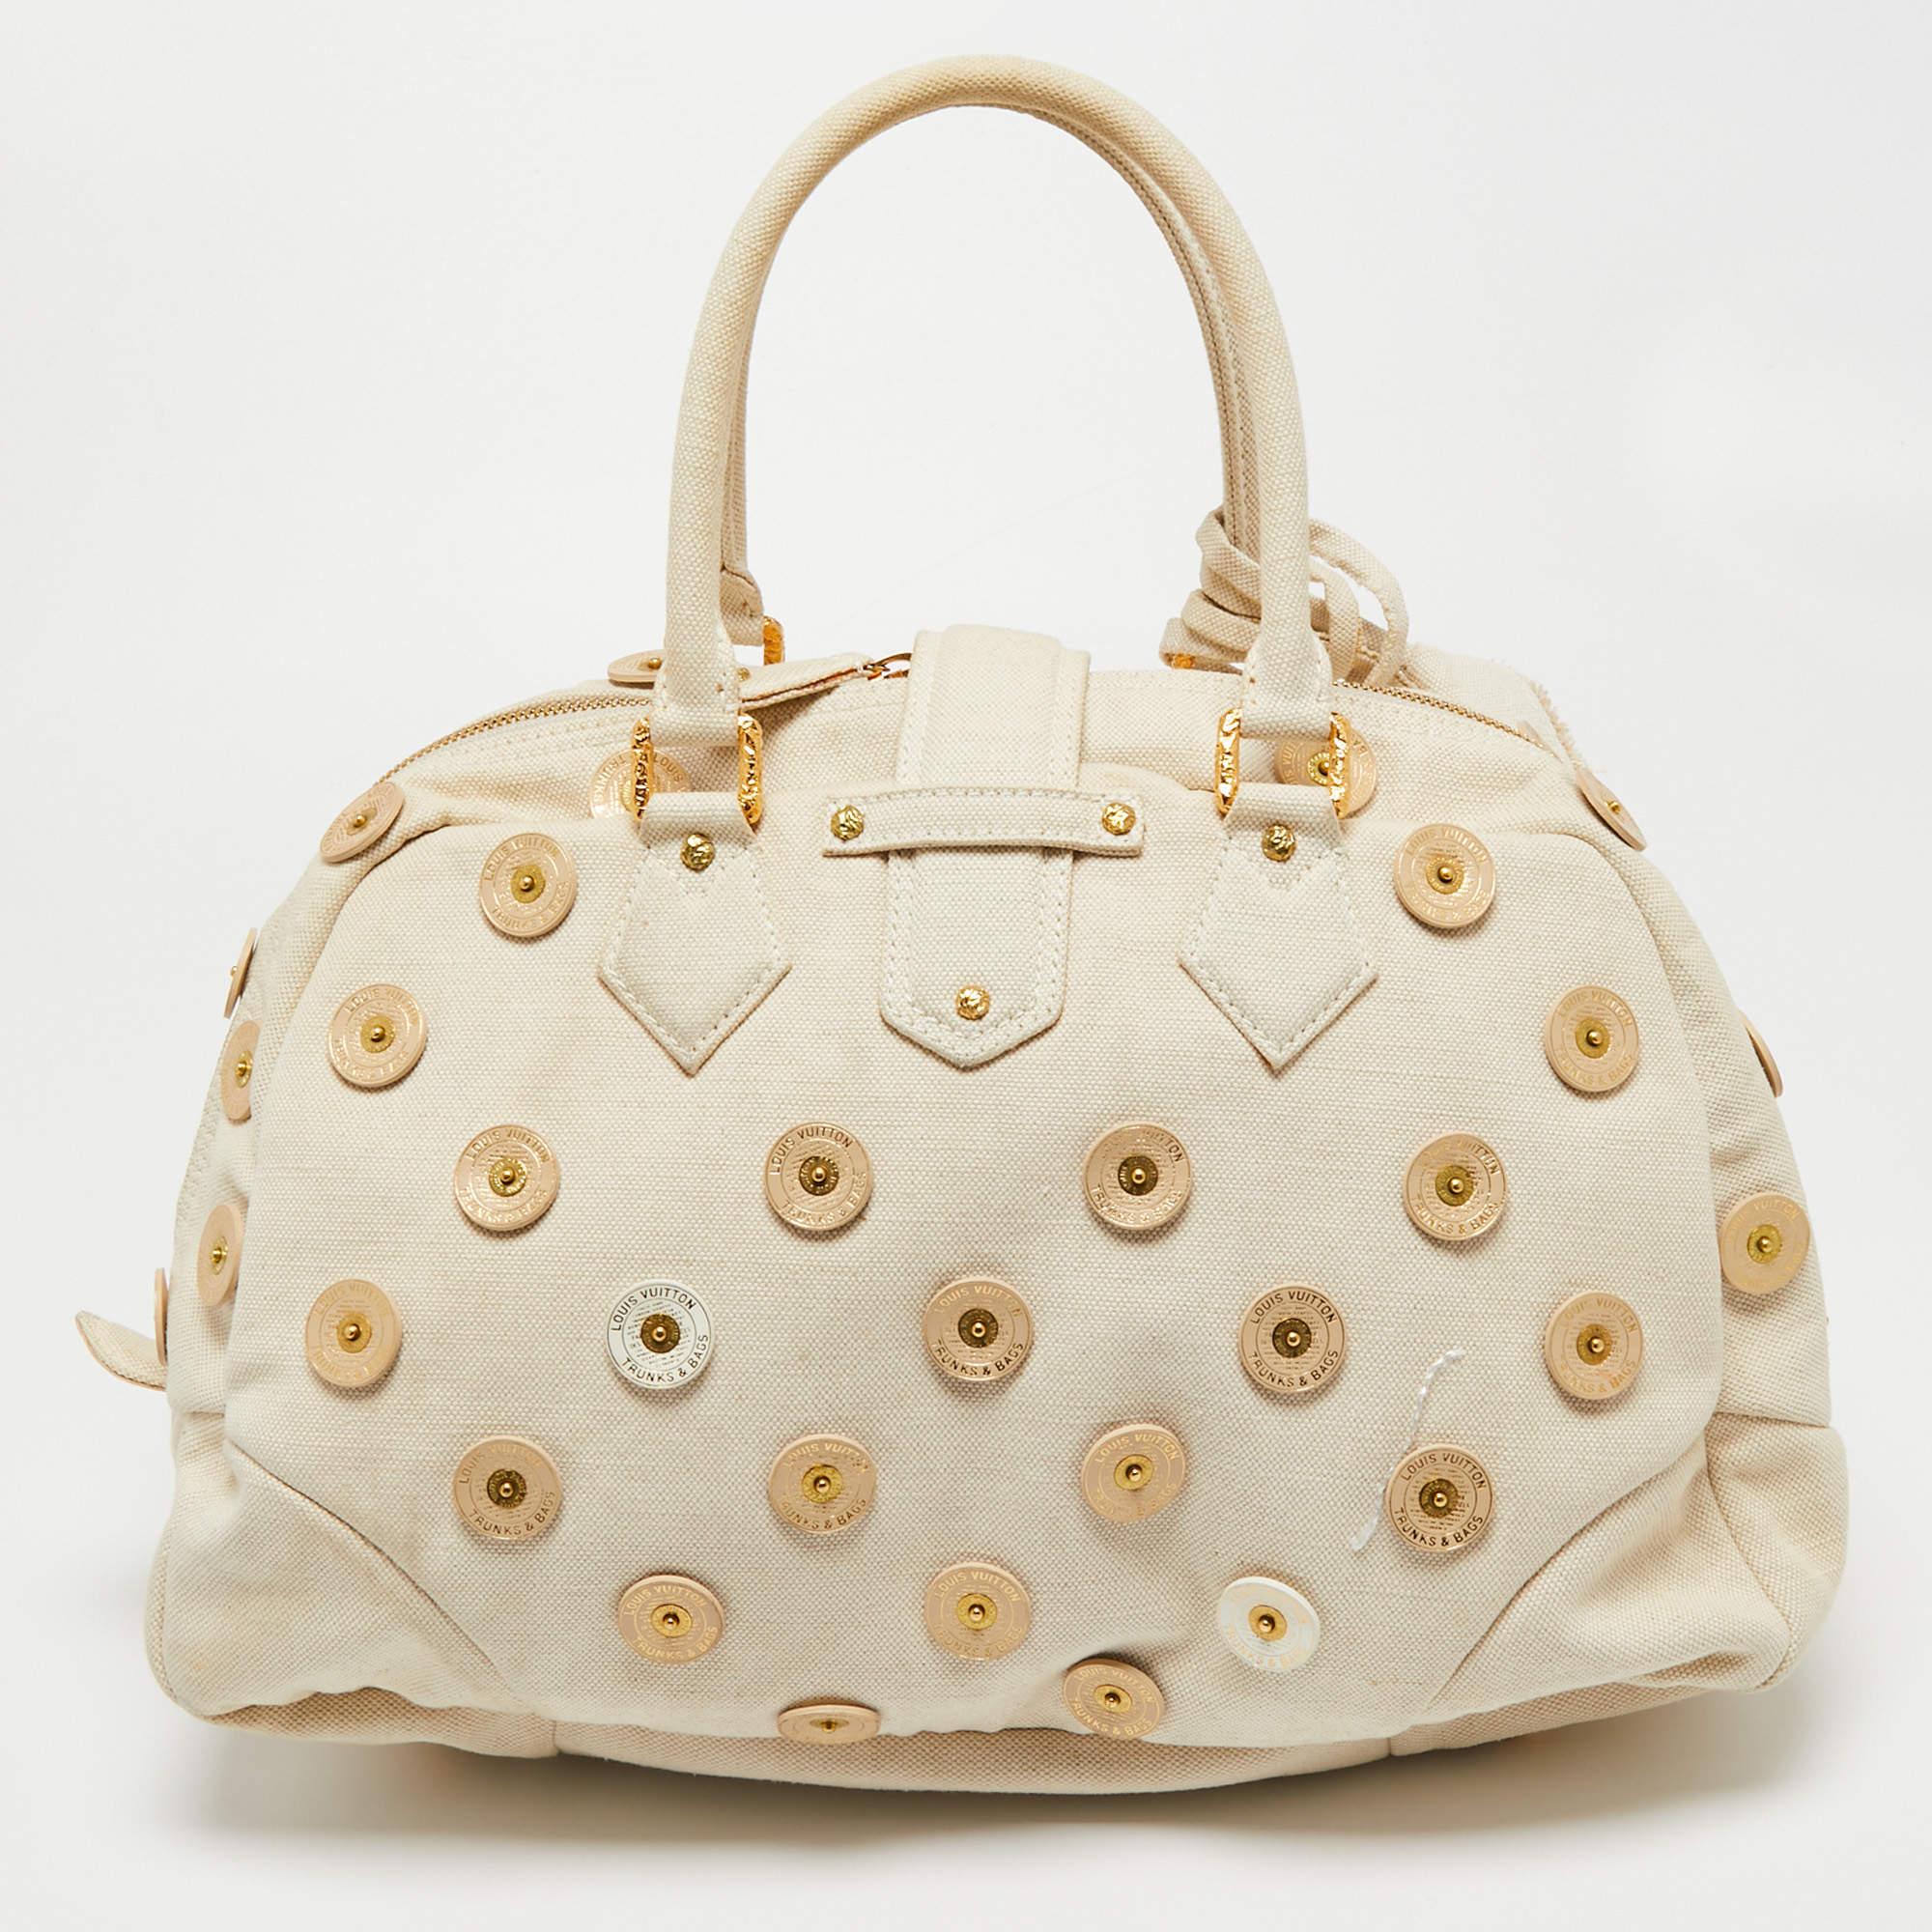 Louis Vuitton's handbags are popular owing to their high style and functionality. Crafted from cream canvas, this Panama Bowly bag has a beautiful polka dot design all over. The pretty bag features dual top handles, tags, a textured S lock, and a